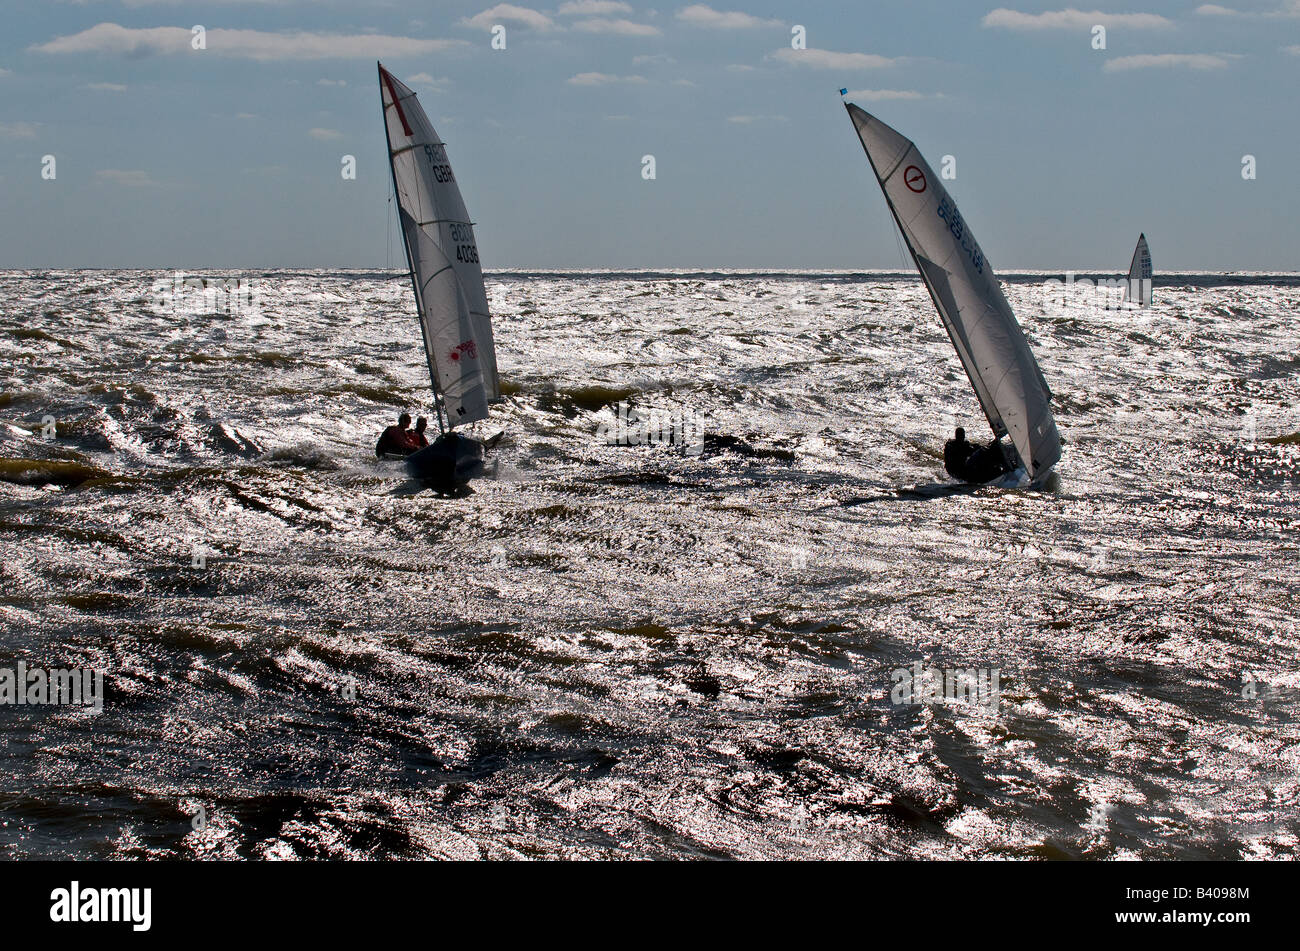 Three Sailboats racing at Southwold in Suffolk in the UK. Stock Photo